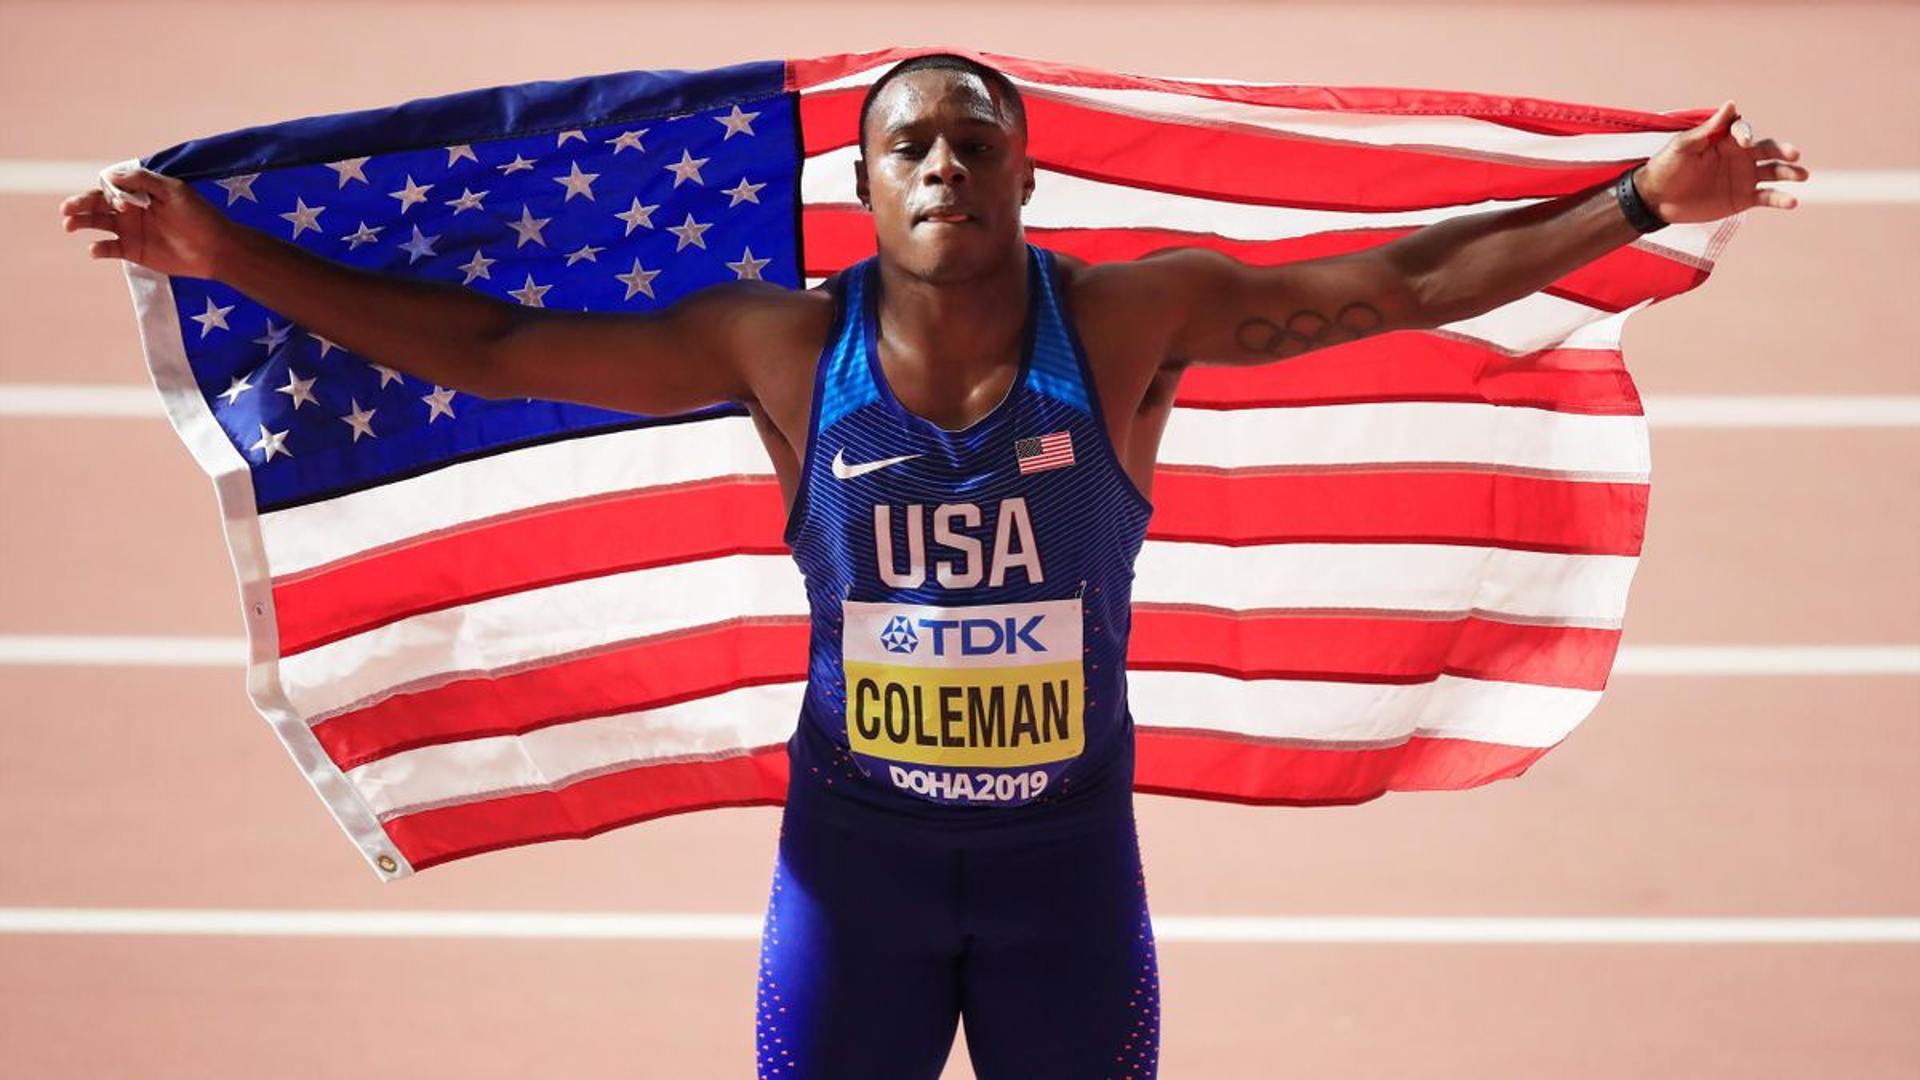 Christian Coleman holding the USA flag post his victory at the World Championships 2019 (Coleman in a file photo)